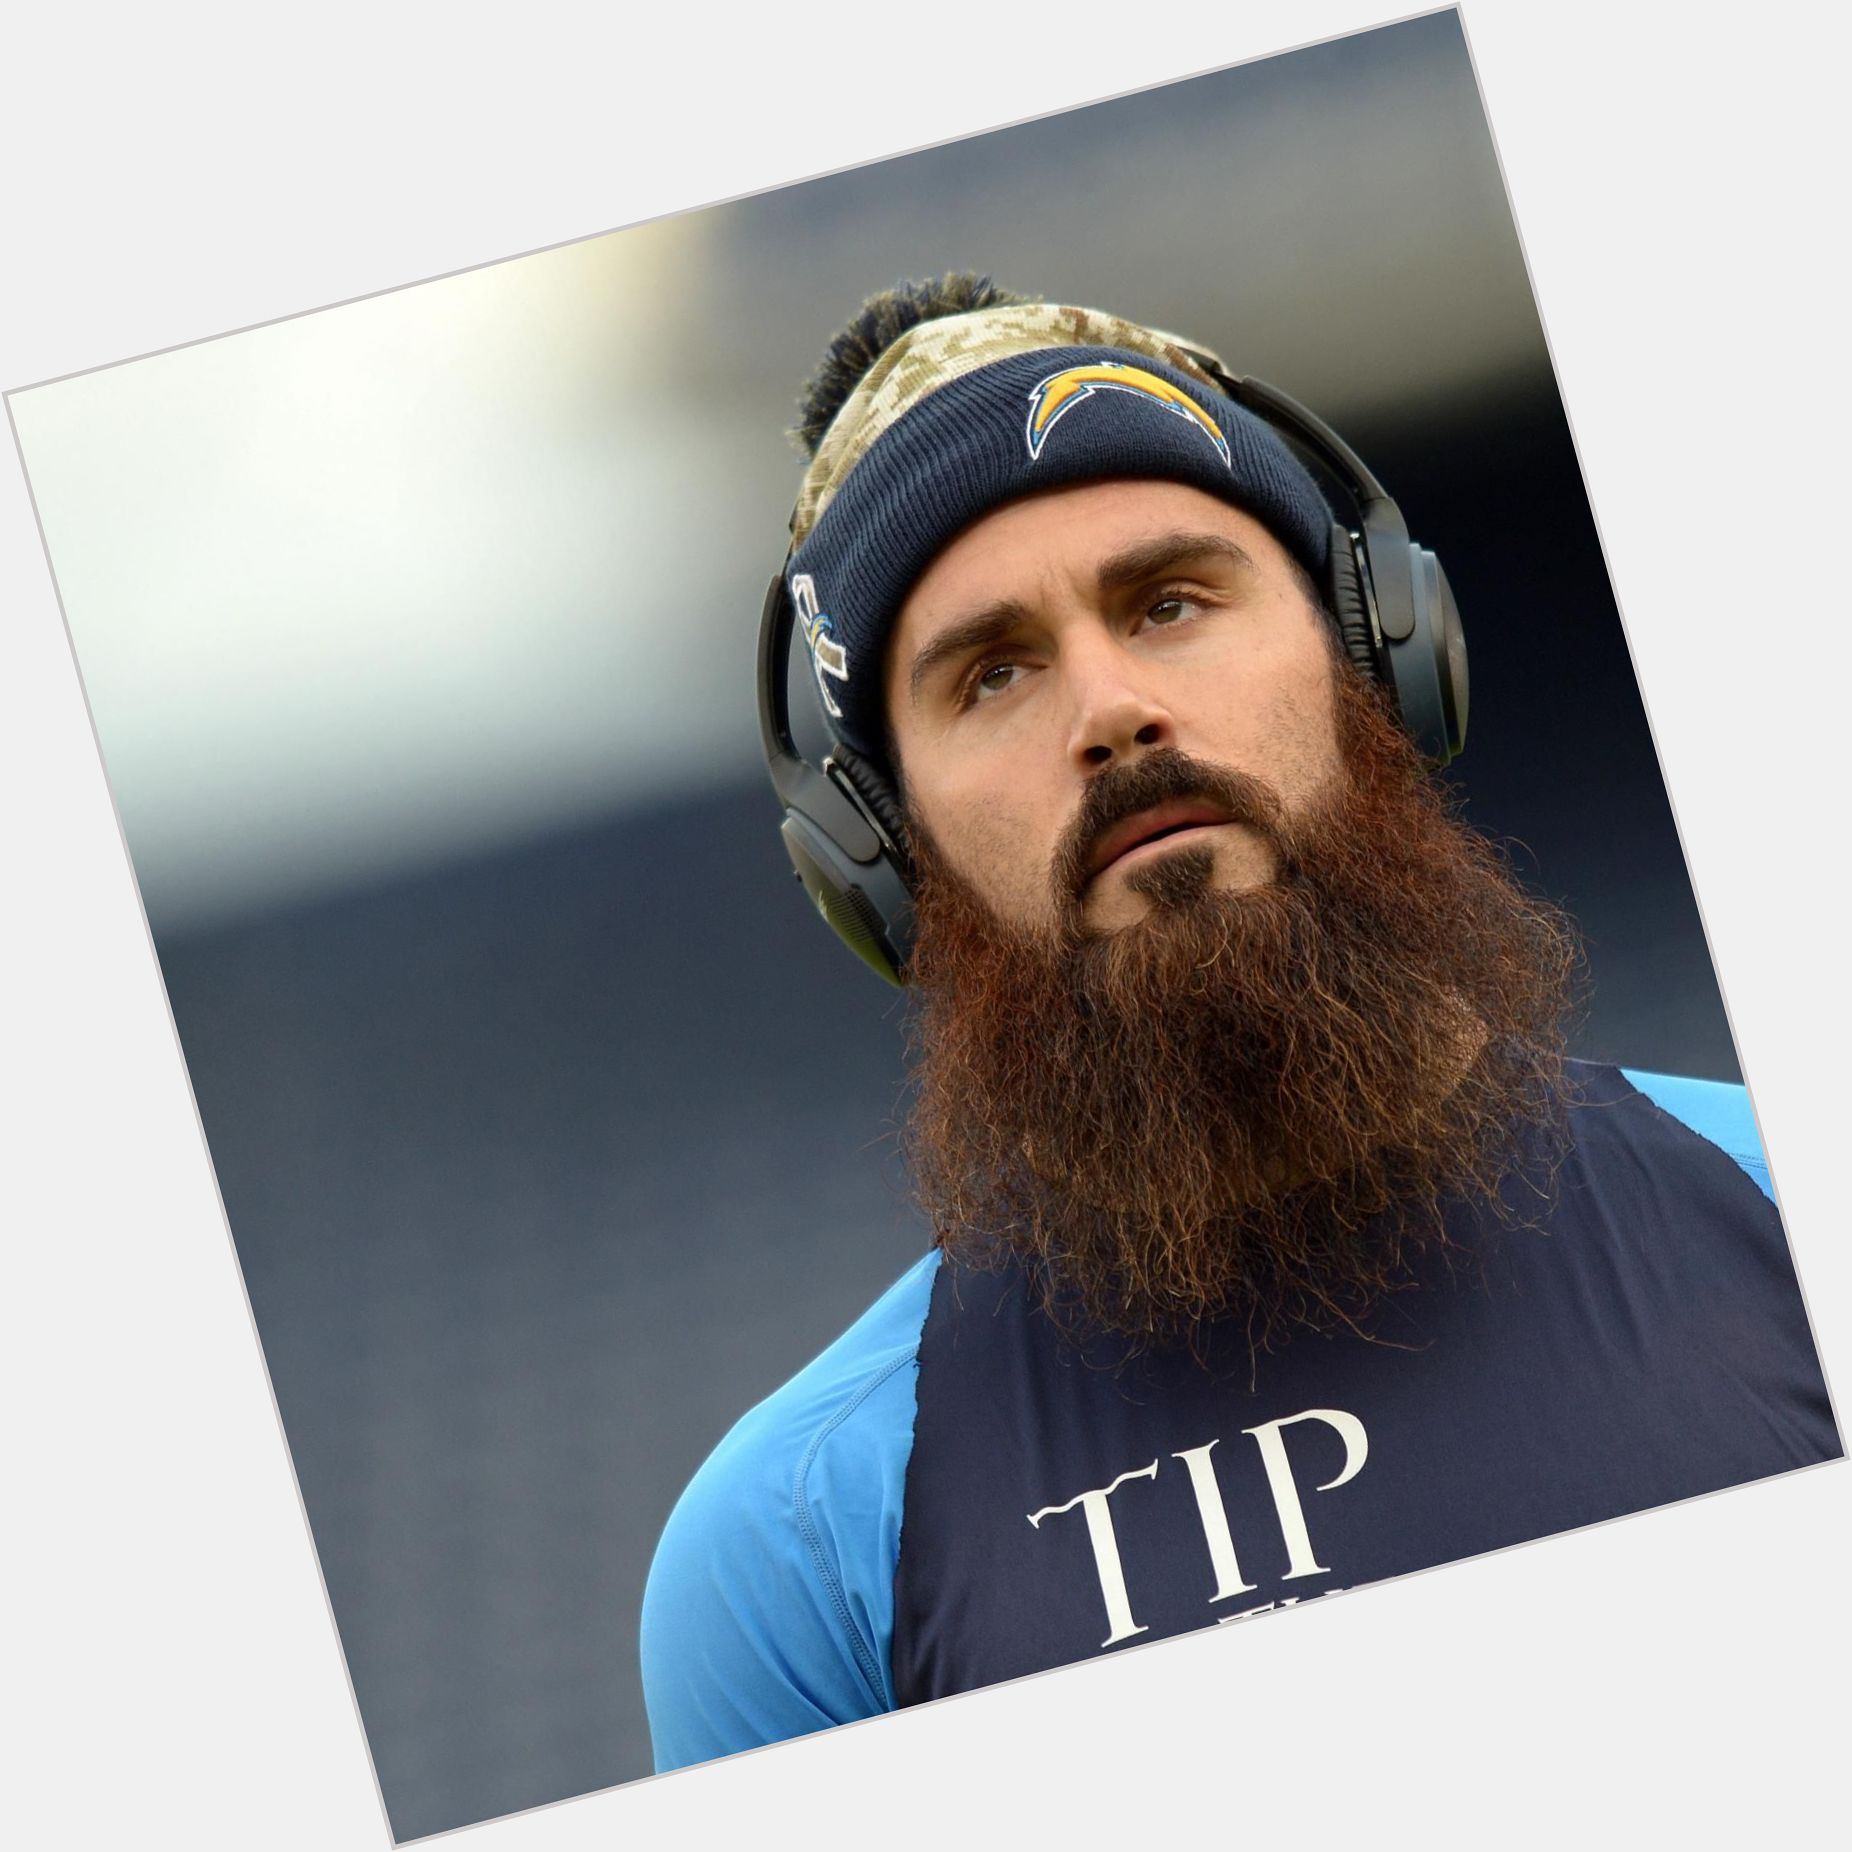 <a href="/hot-men/eric-weddle/is-he-married-where">Eric Weddle</a>  